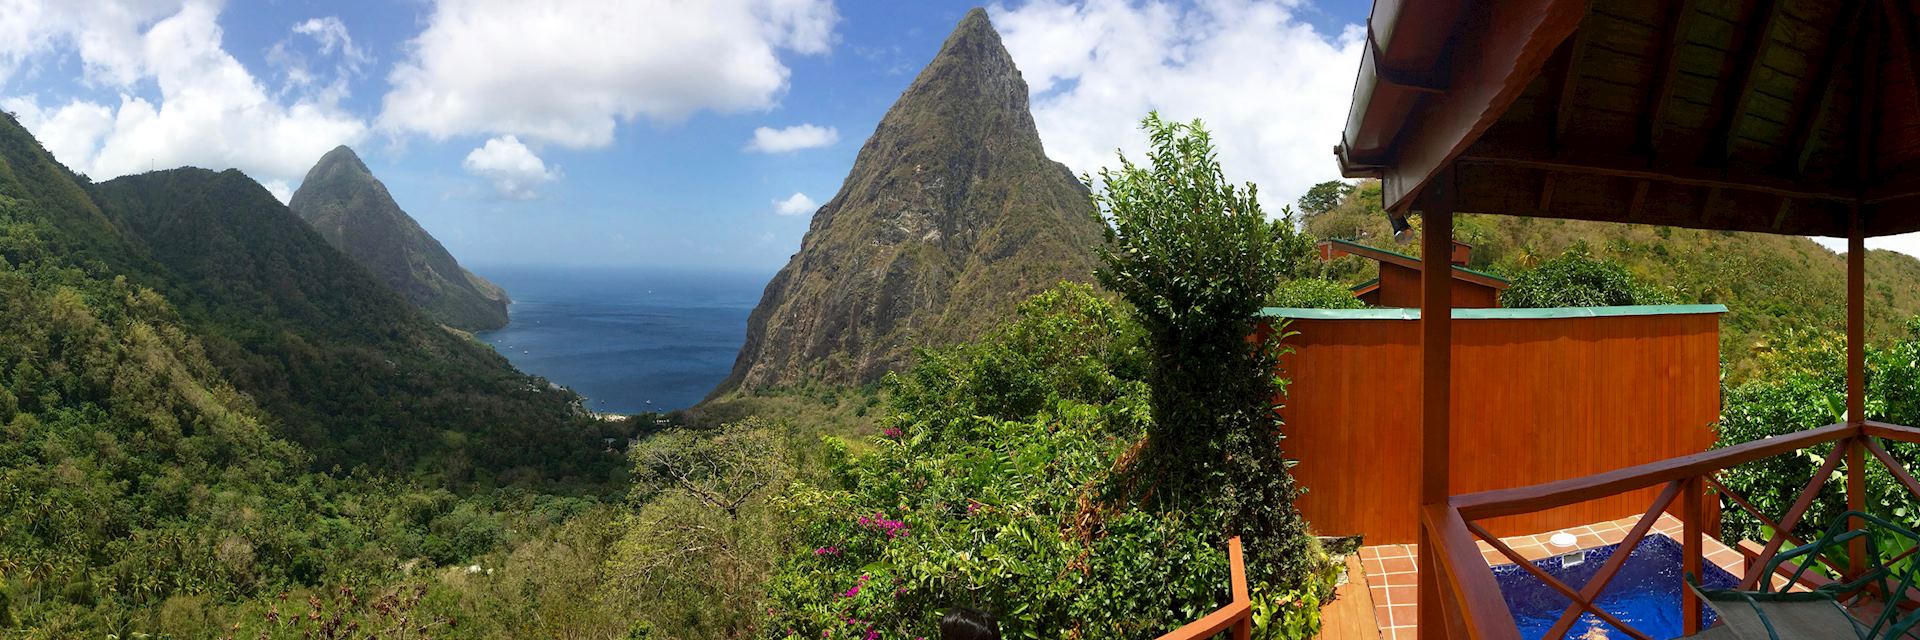 View of the Pitons, Saint Lucia